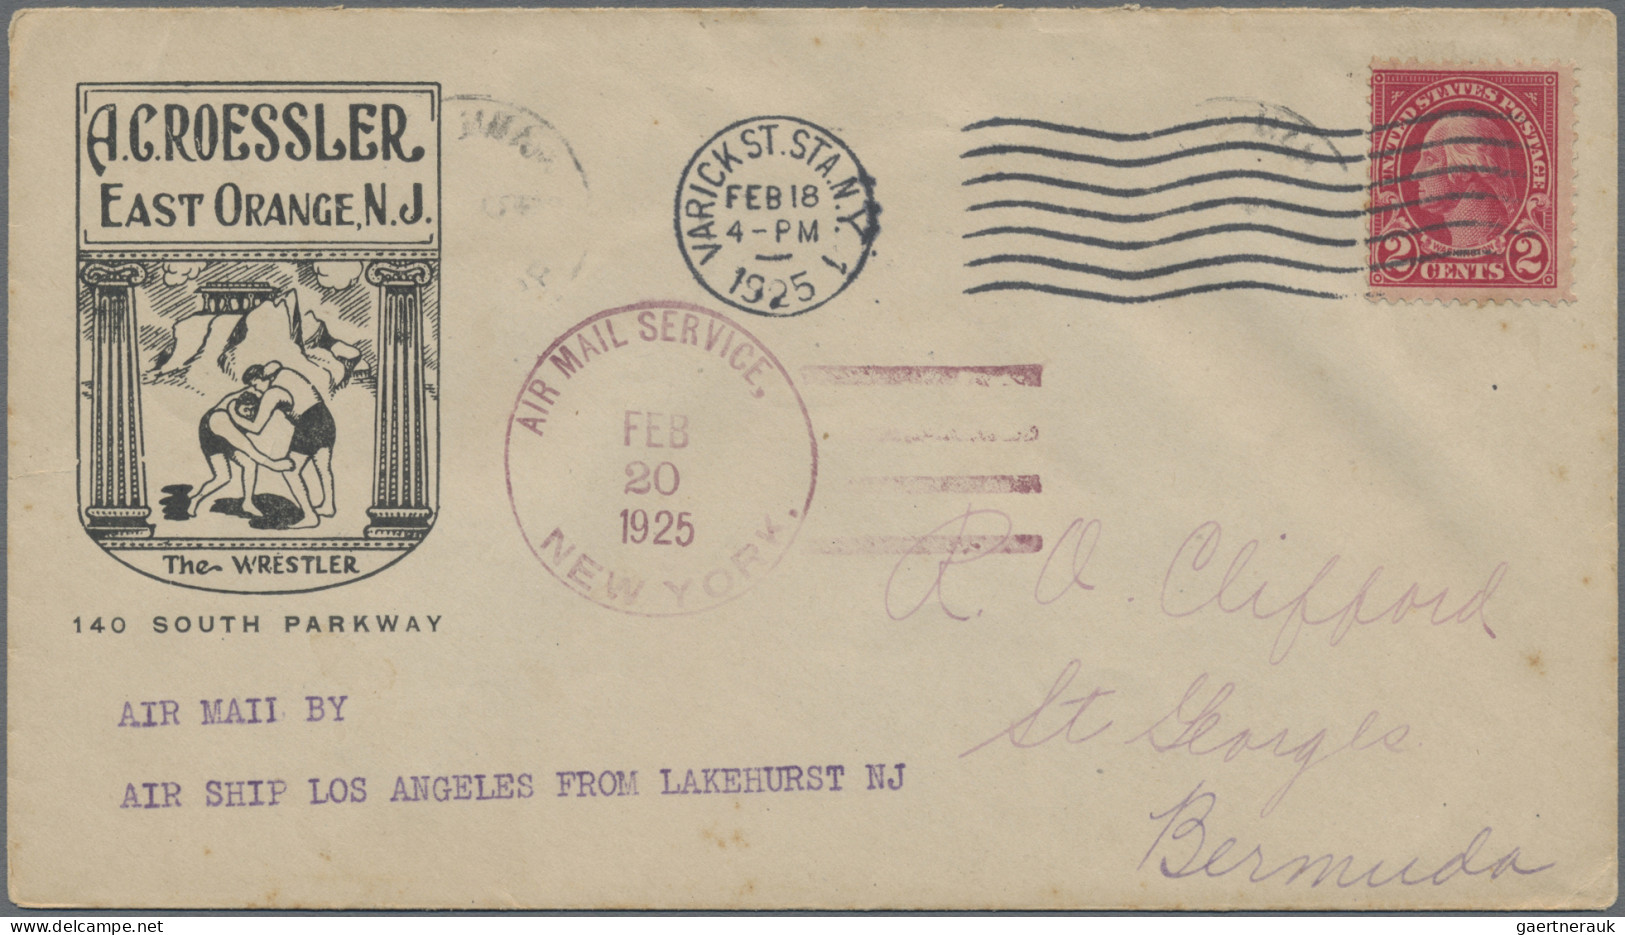 Air Mail: 1922/1925 ca.: 32 airmail cards, covers and postal stationery items fr